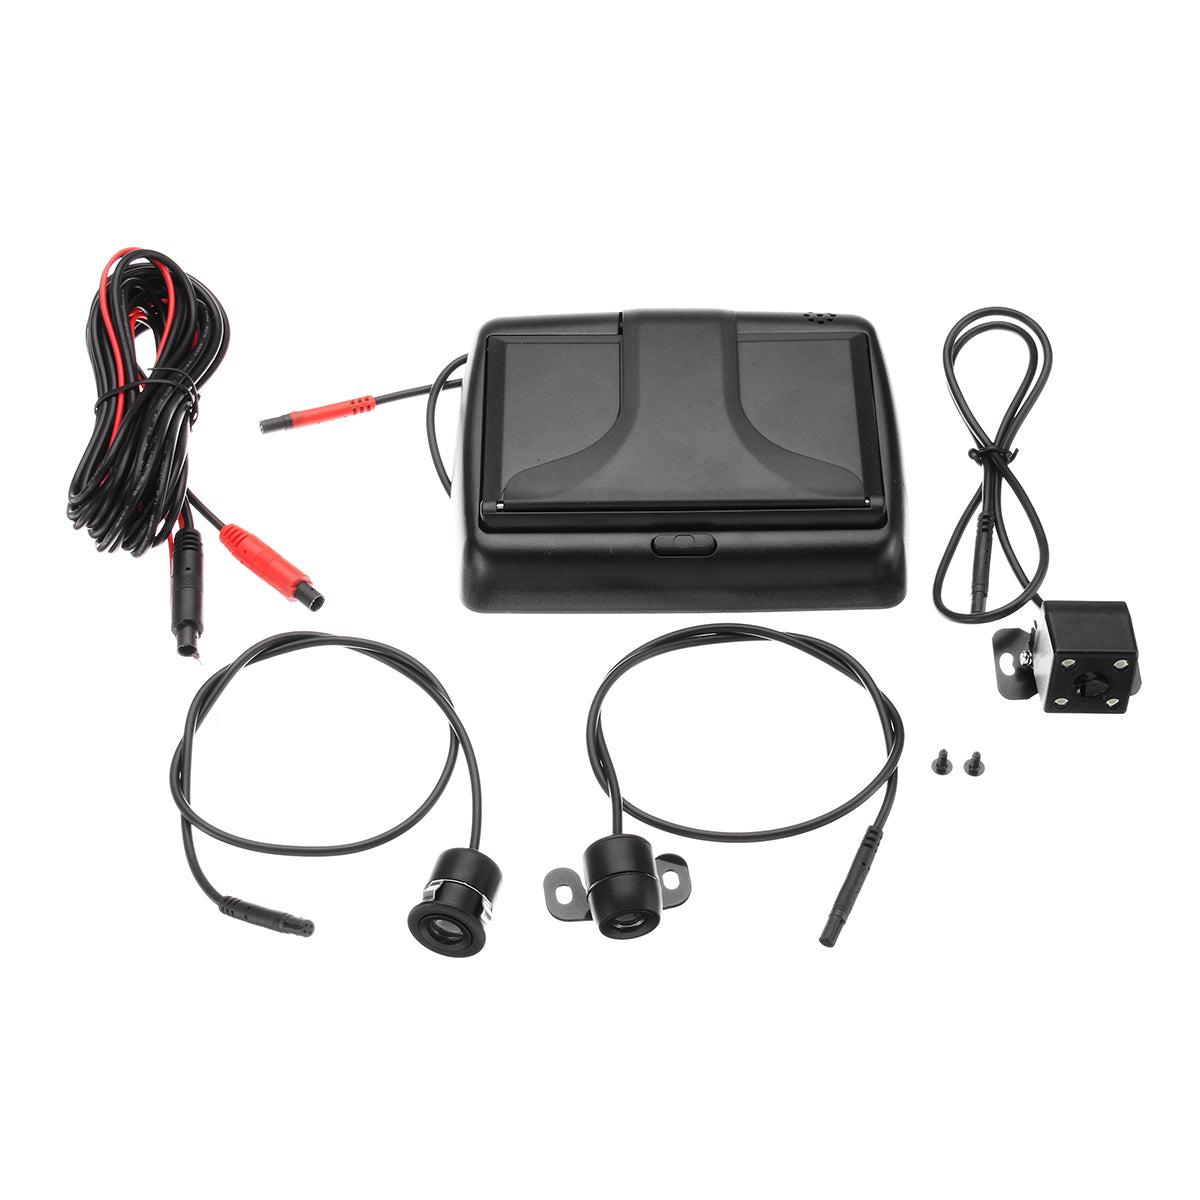 Foldable 4.3 Inch LCD Car Reverse Rear View Monitor Parking Backup Camera Set - Auto GoShop